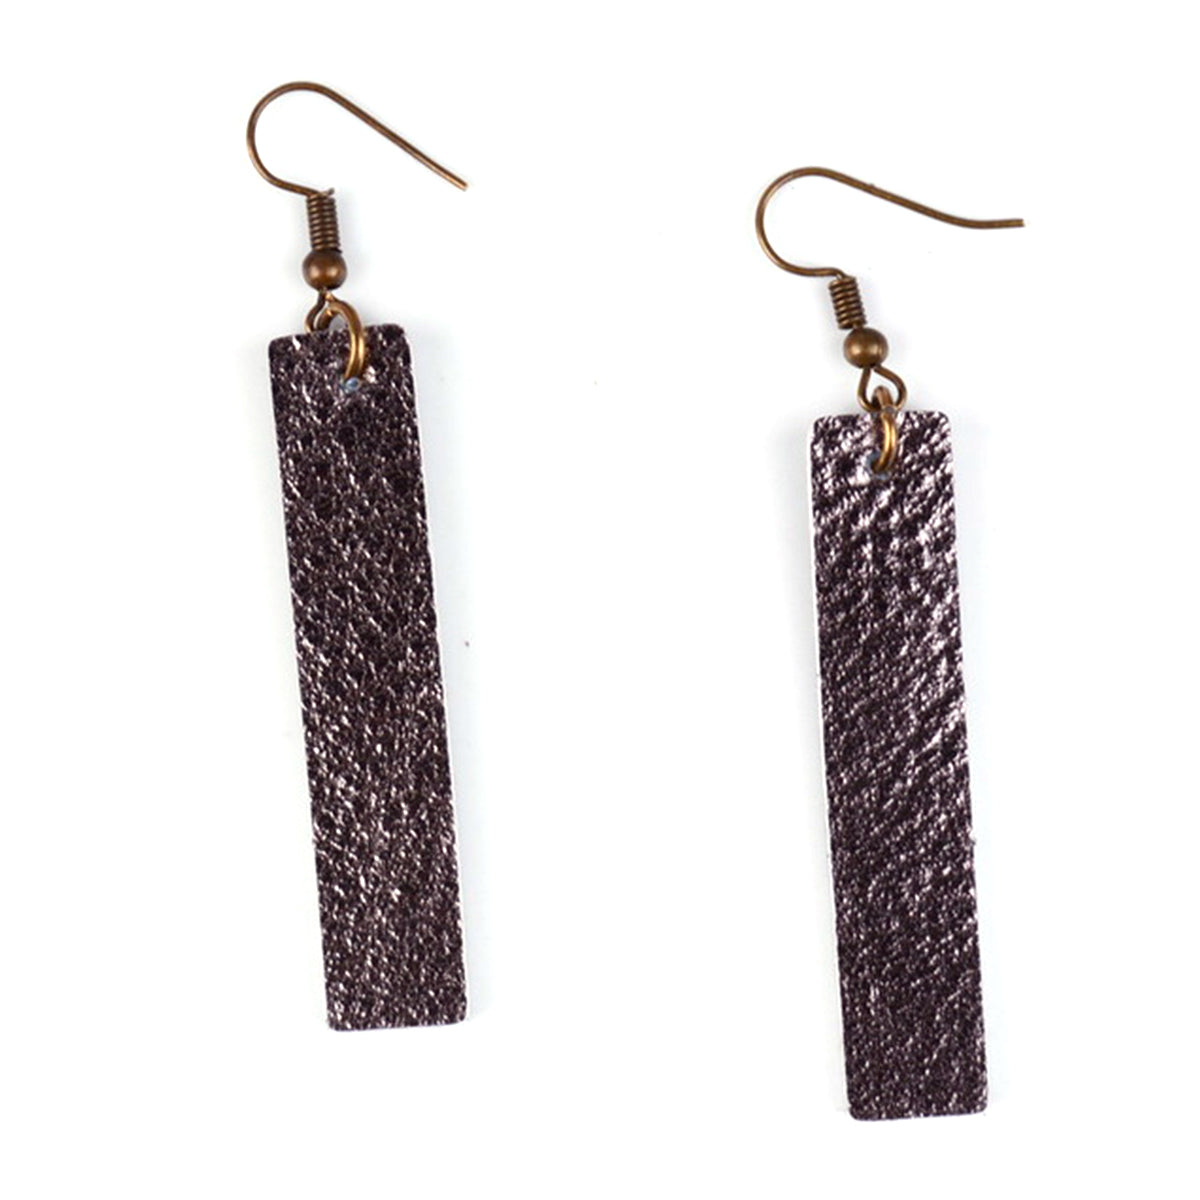 Metallic Charcoal Gray Leather Strip Earrings inspired by Joanna Gaines